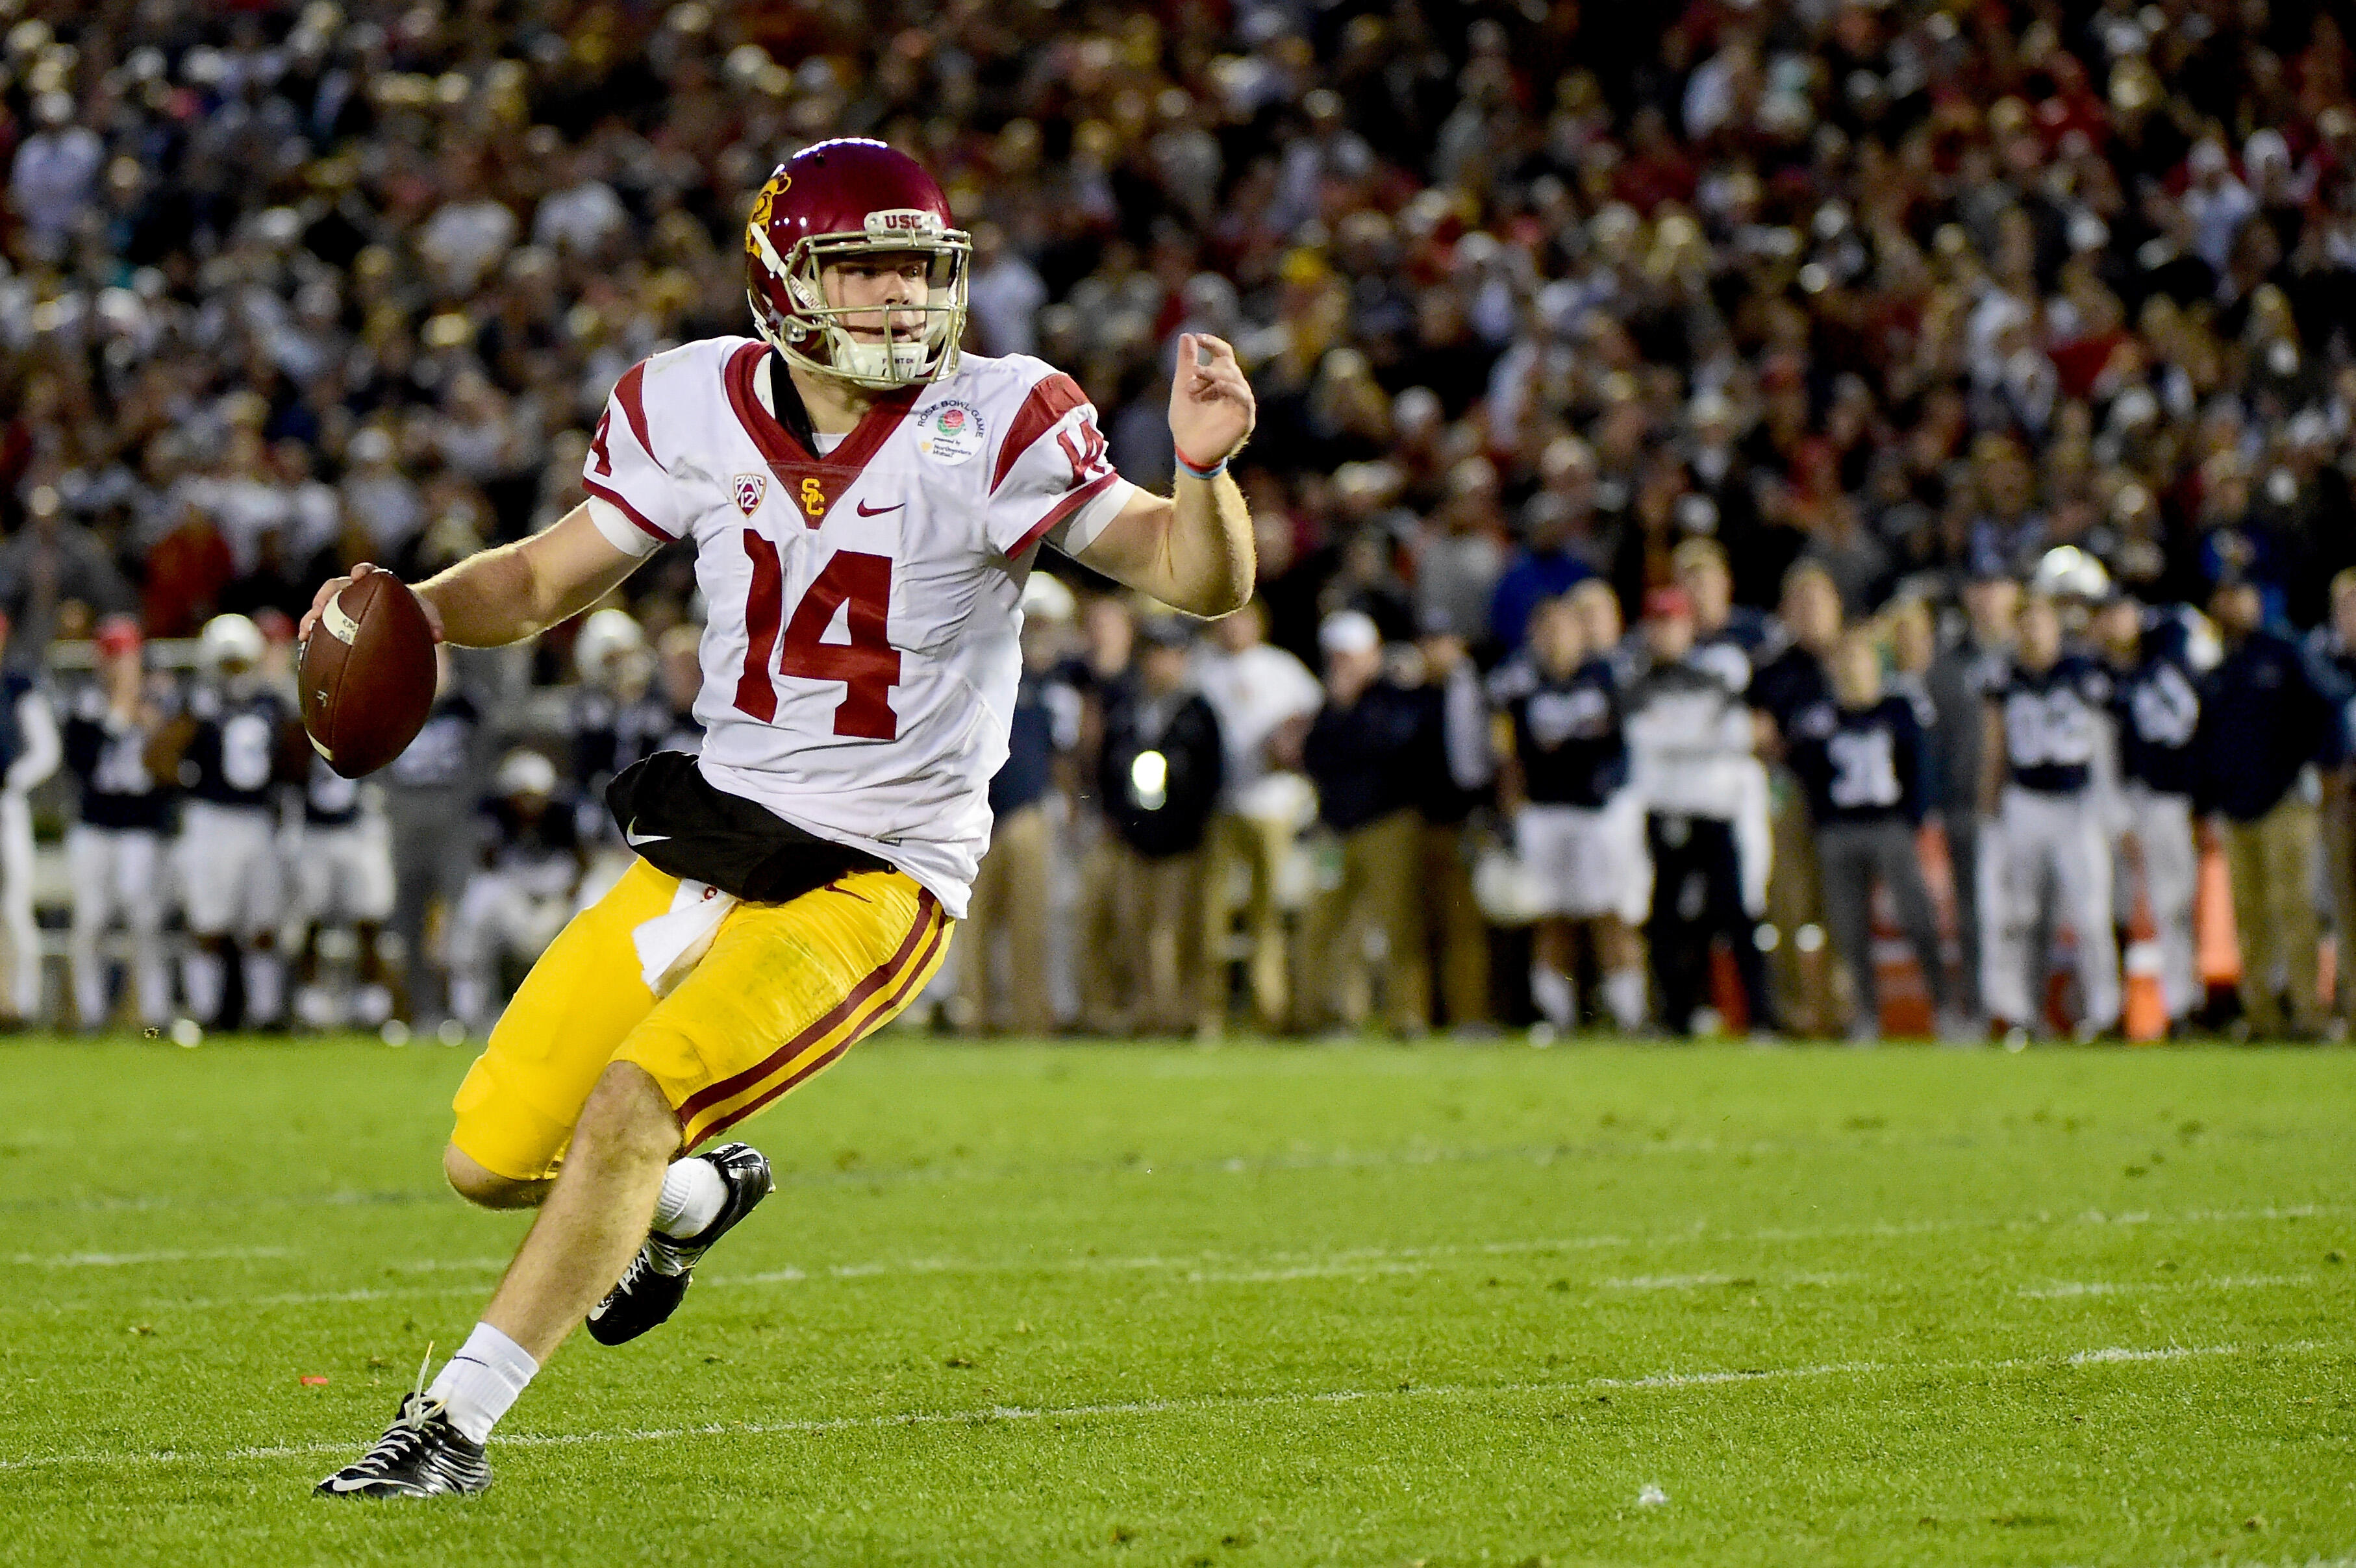 PASADENA, CA - JANUARY 02:  Quarterback Sam Darnold #14 of the USC Trojans scrambles prior to throwing a touchdown pass in the third quarter against the Penn State Nittany Lions during the 2017 Rose Bowl Game presented by Northwestern Mutual at the Rose B